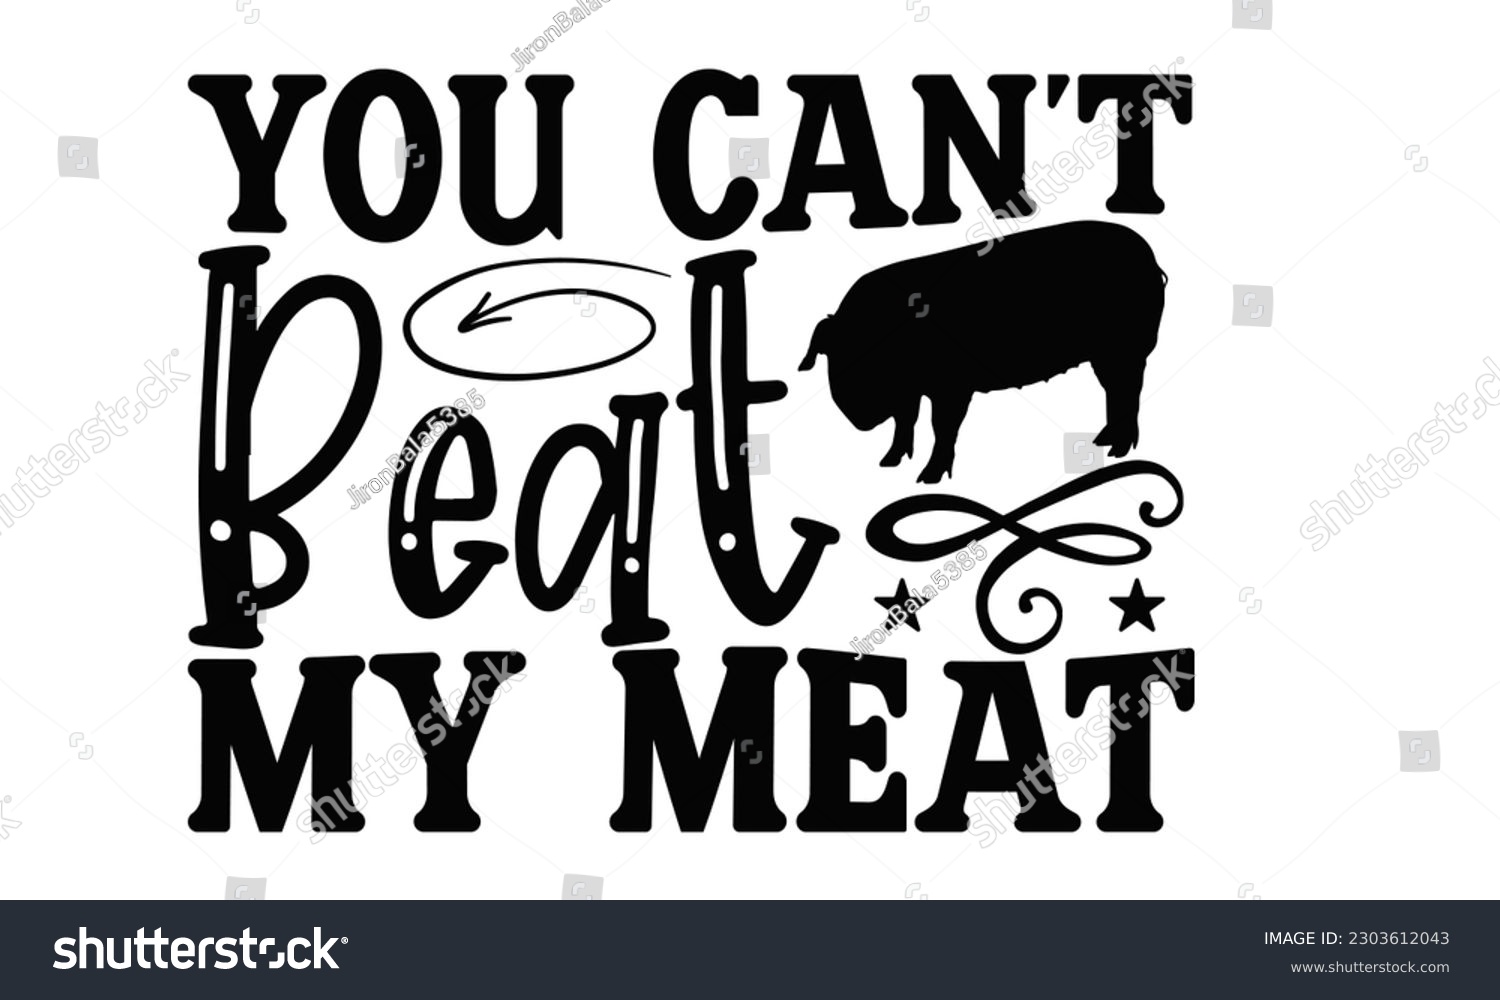 SVG of You Can’t Beat My Meat - Barbecue SVG Design, Hand drawn vintage illustration with hand-lettering and decoration element, for prints on t-shirts, bags and Mug.
 svg